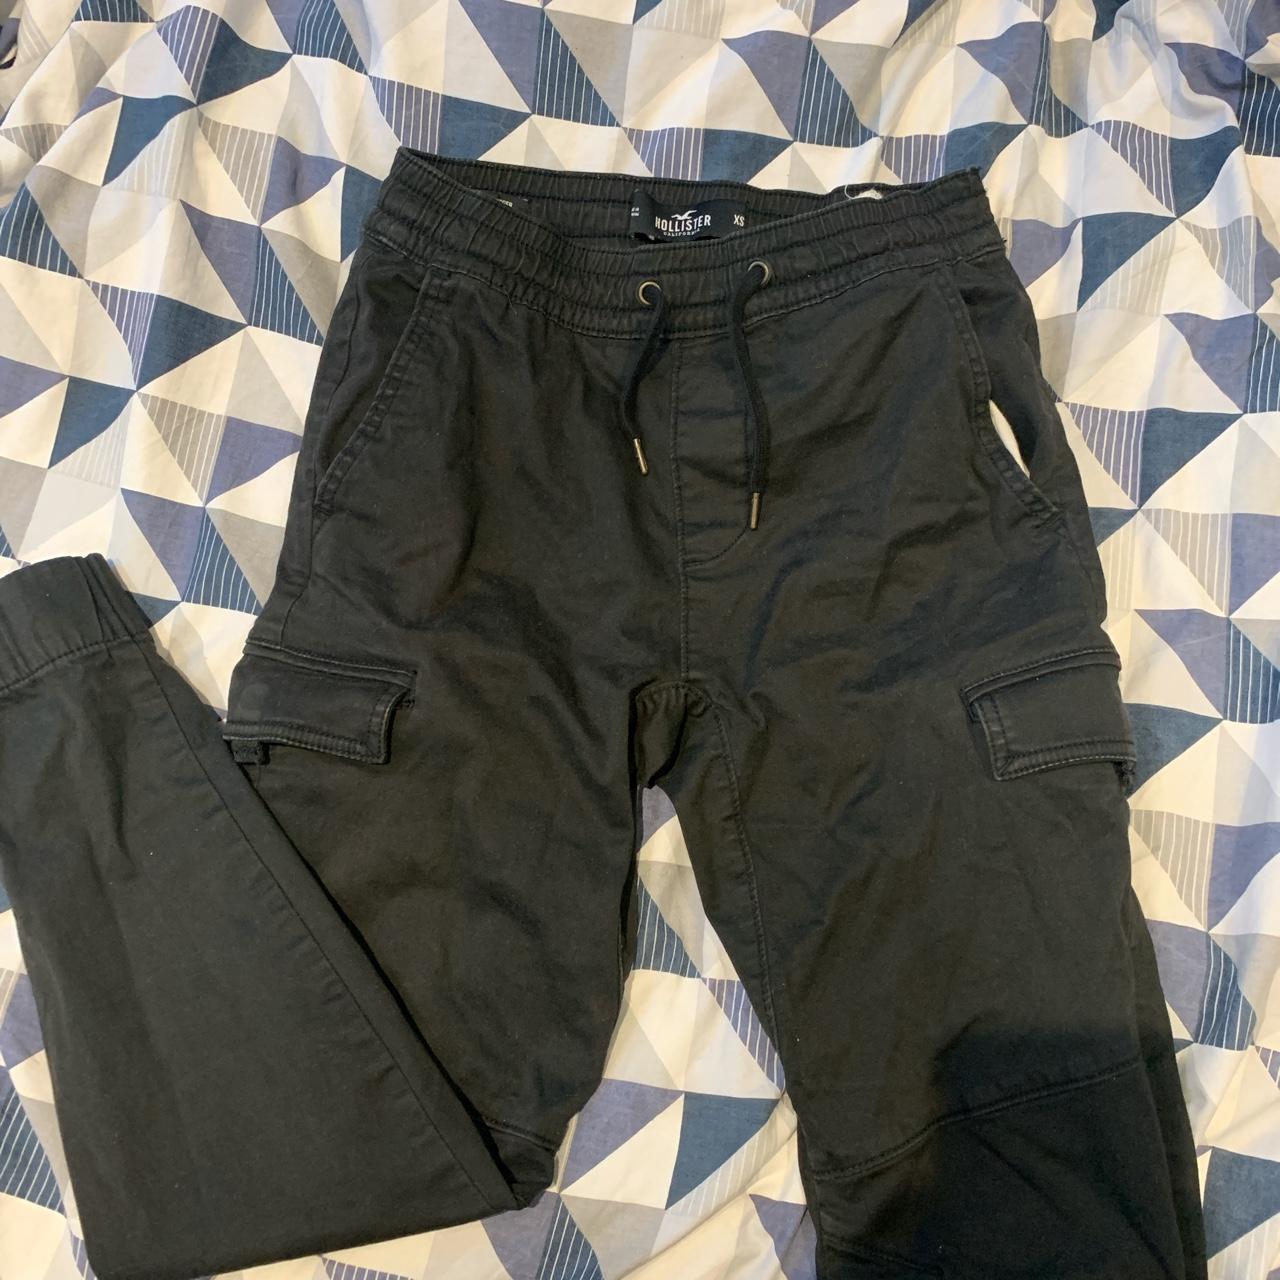 New and used Womens Cargo Pants for sale  Facebook Marketplace  Facebook